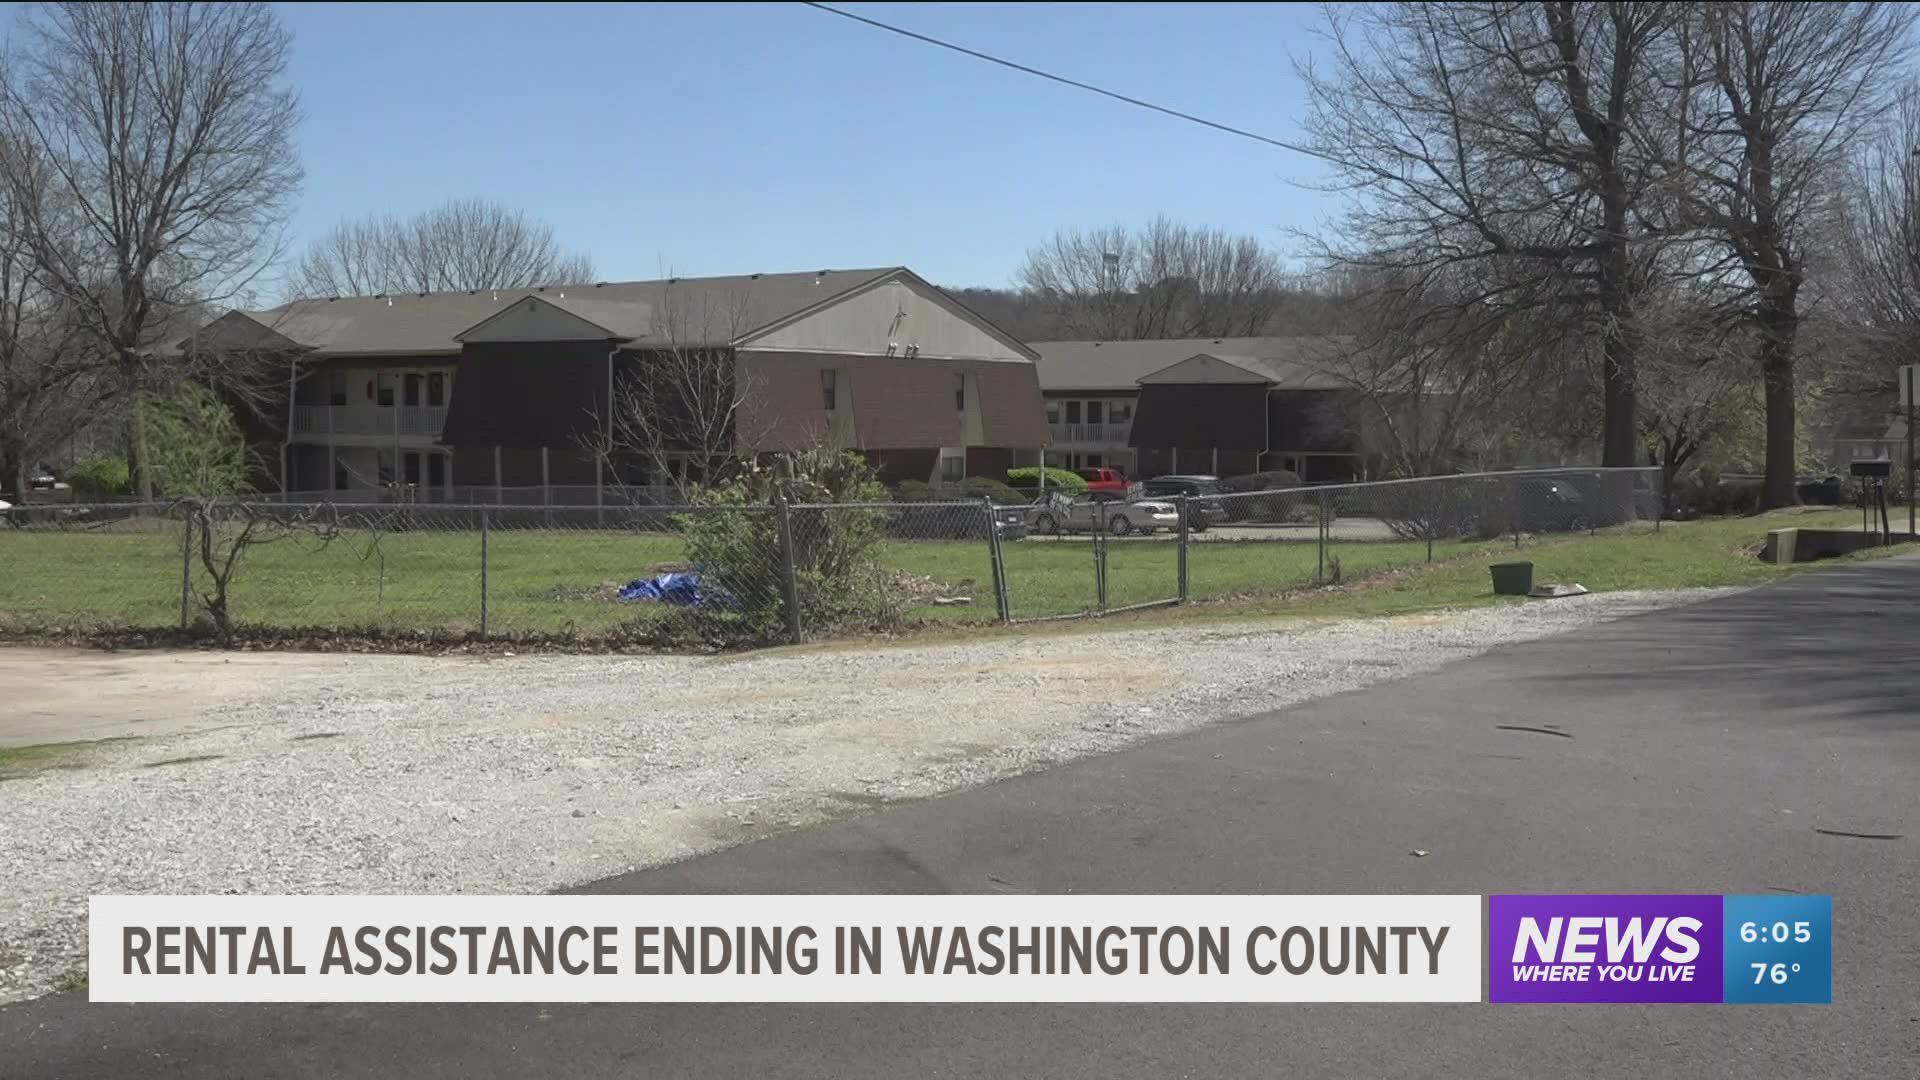 Over 3,000 Washington County residents participating in the Rental Assistance Program received a letter saying the program had insufficient funds.